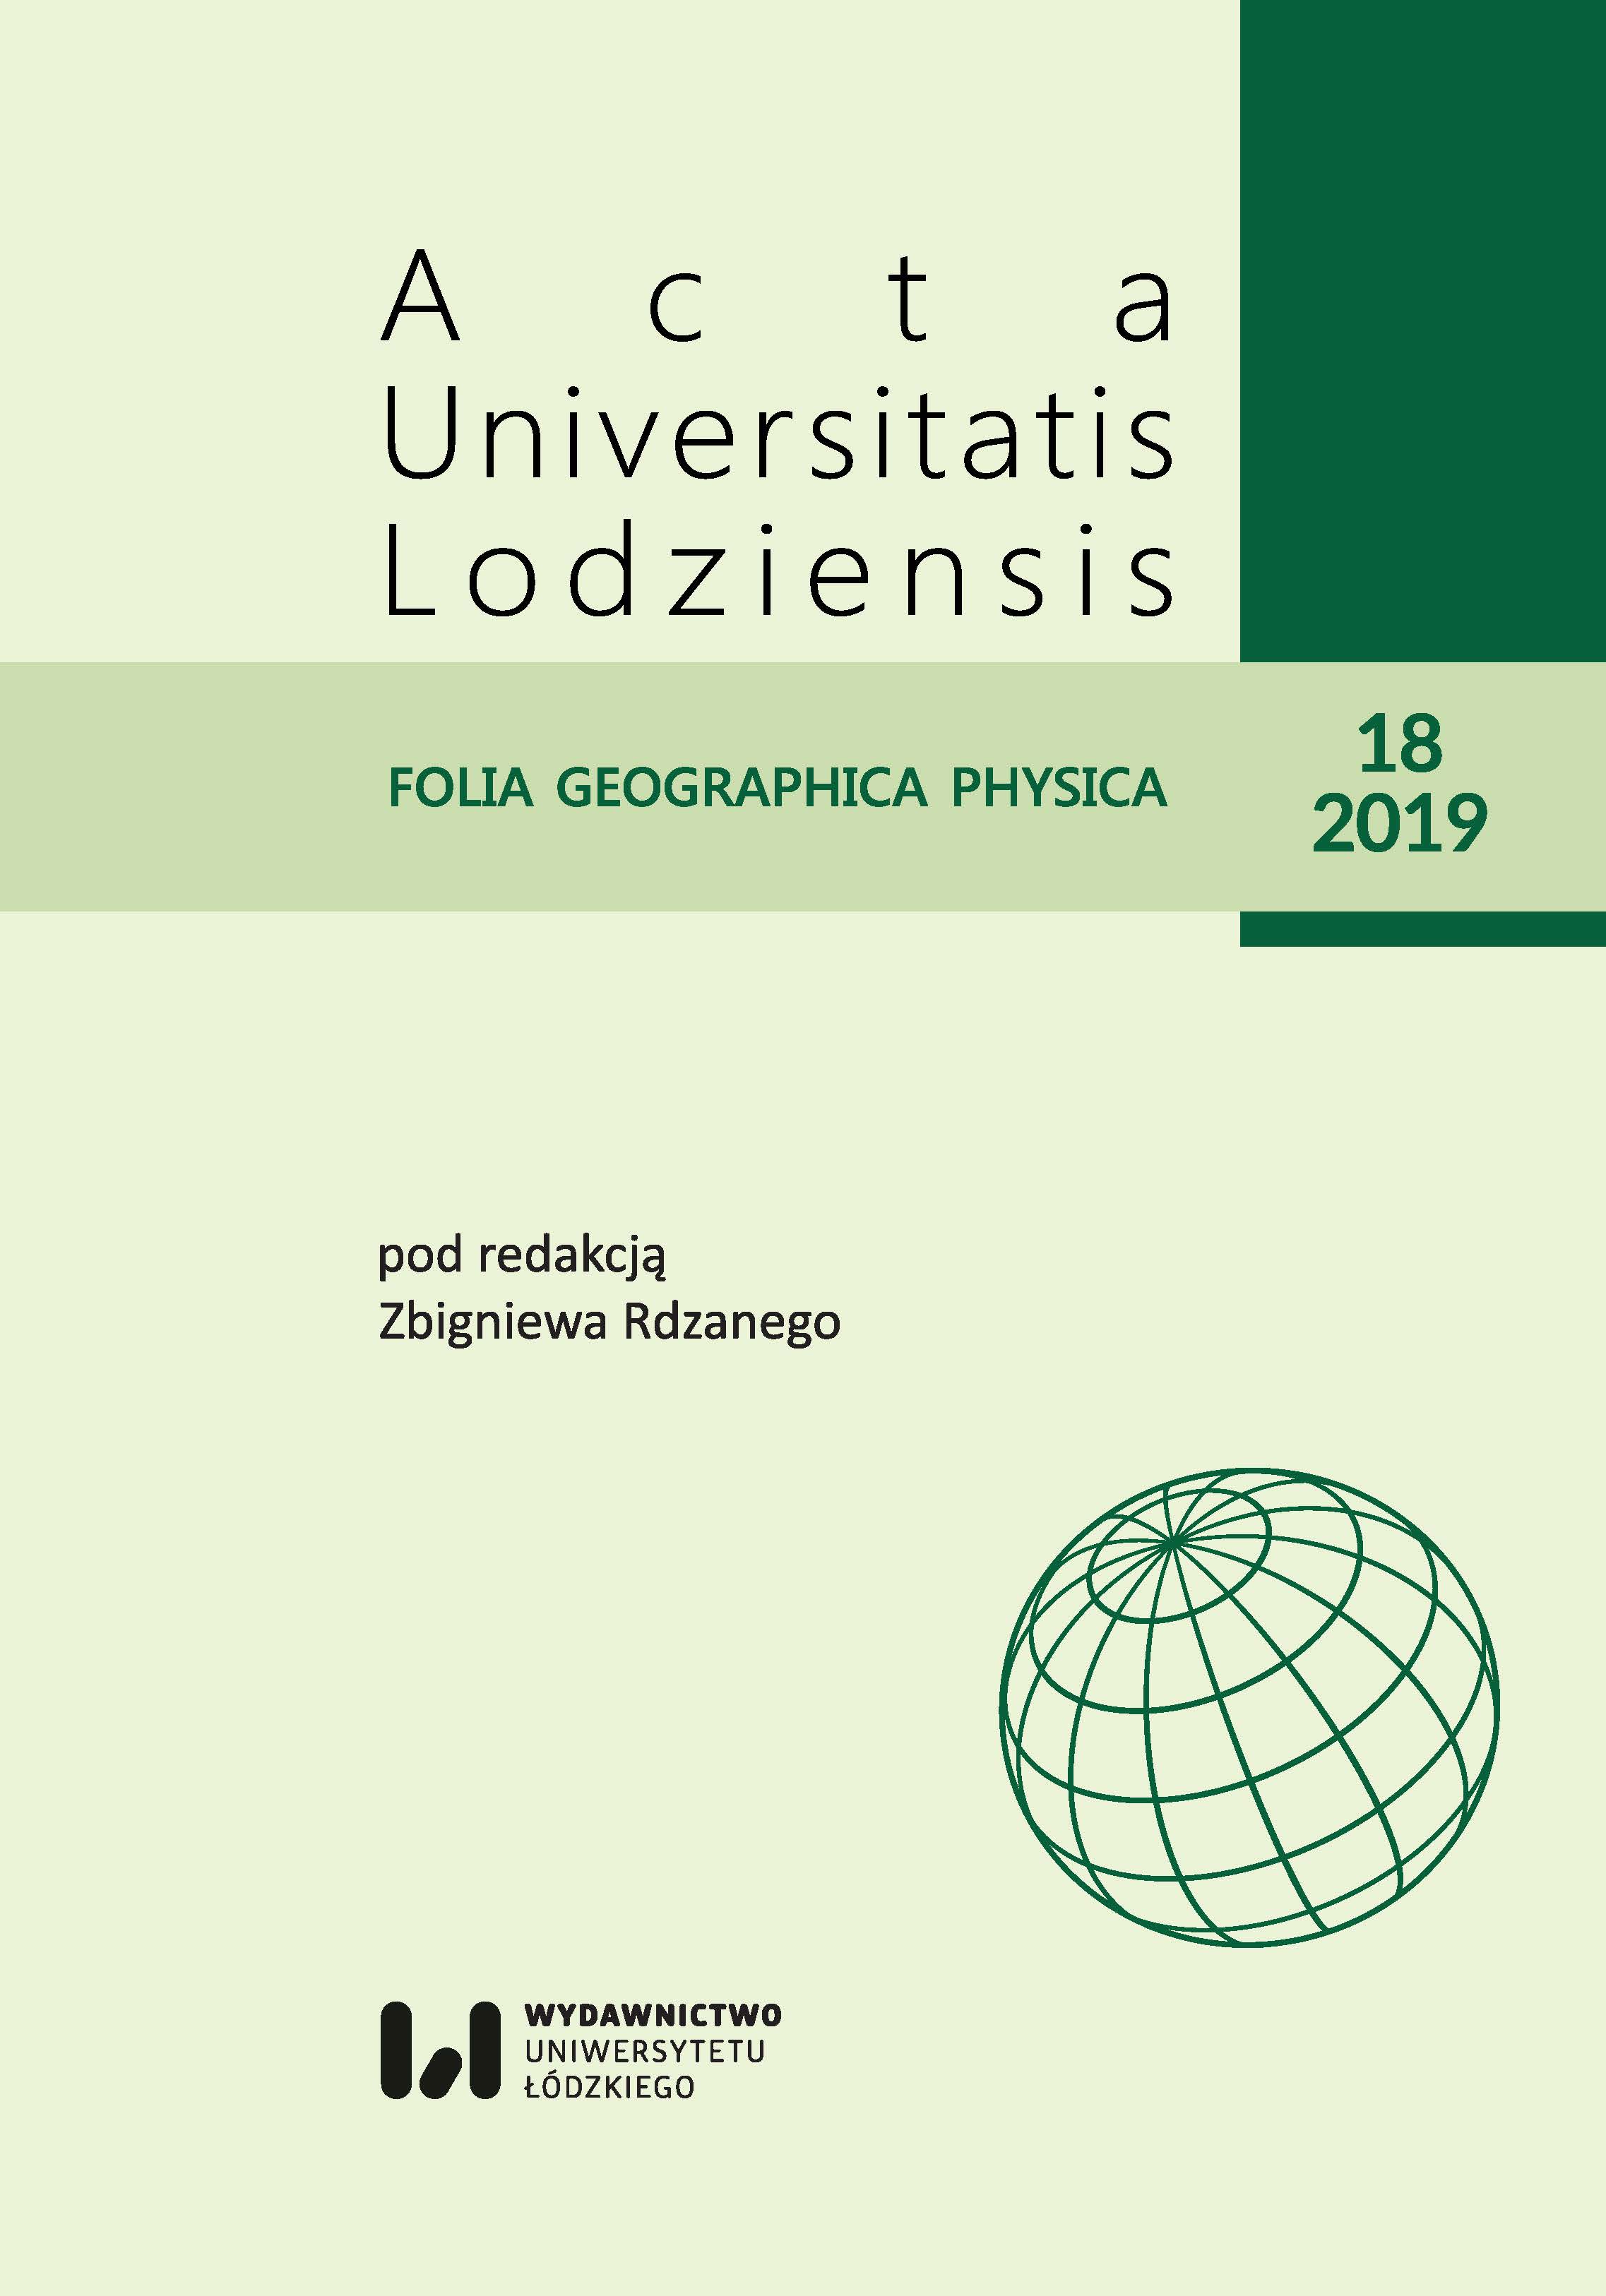 Papers published in the journal Acta Universitatis Lodziensis Folia Geographica Physica in the years 1997–2019 Cover Image